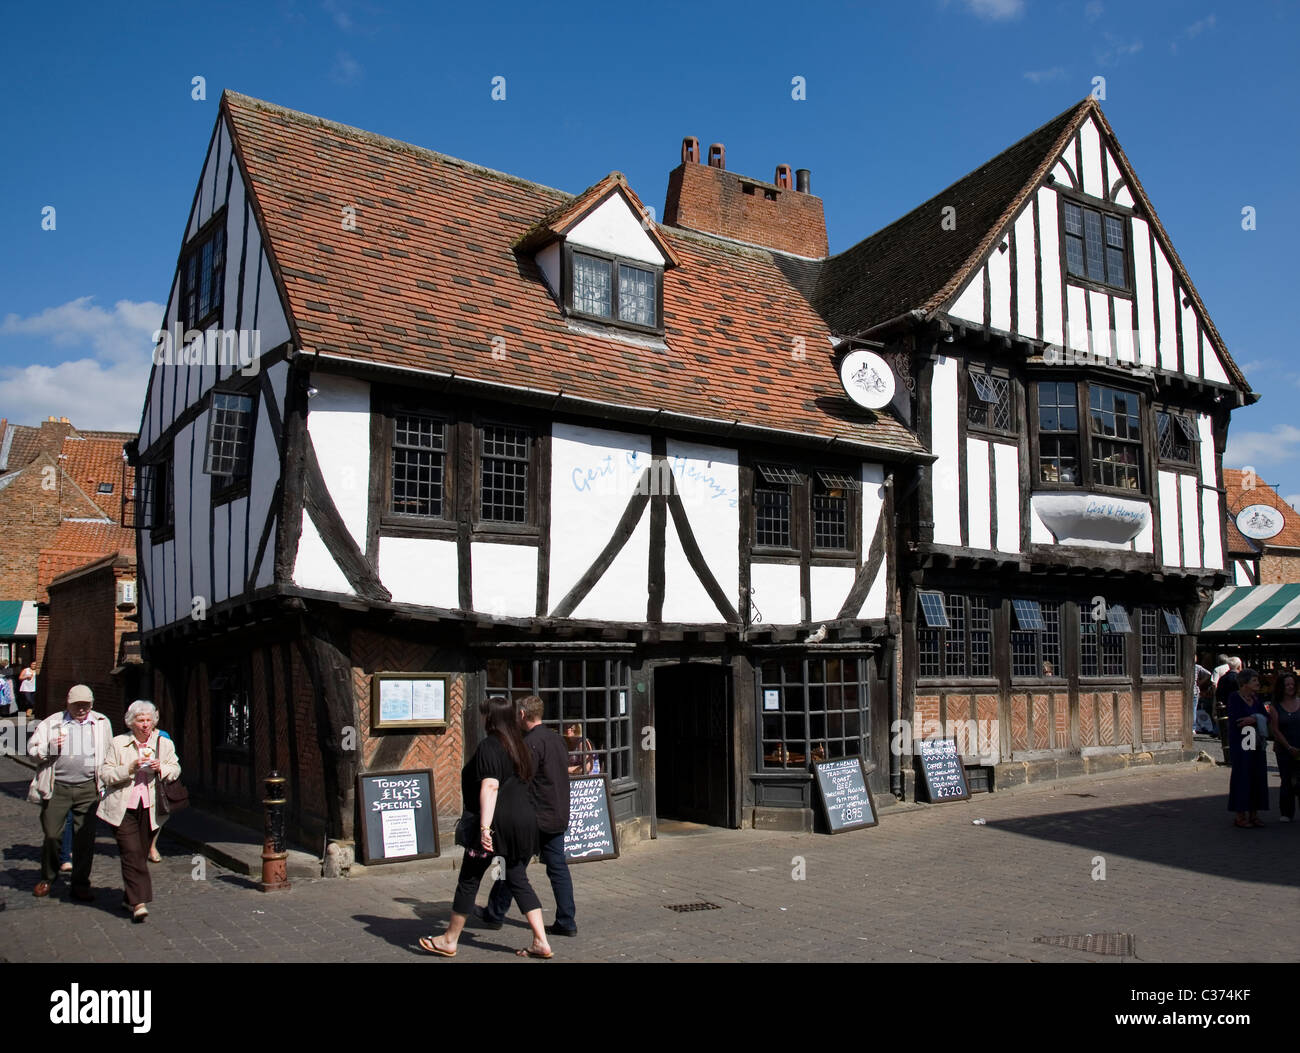 People walking past a Tudor timber fronted restaurant on The Shambles near Newgate Market, York city centre, North Yorkshire, UK Stock Photo